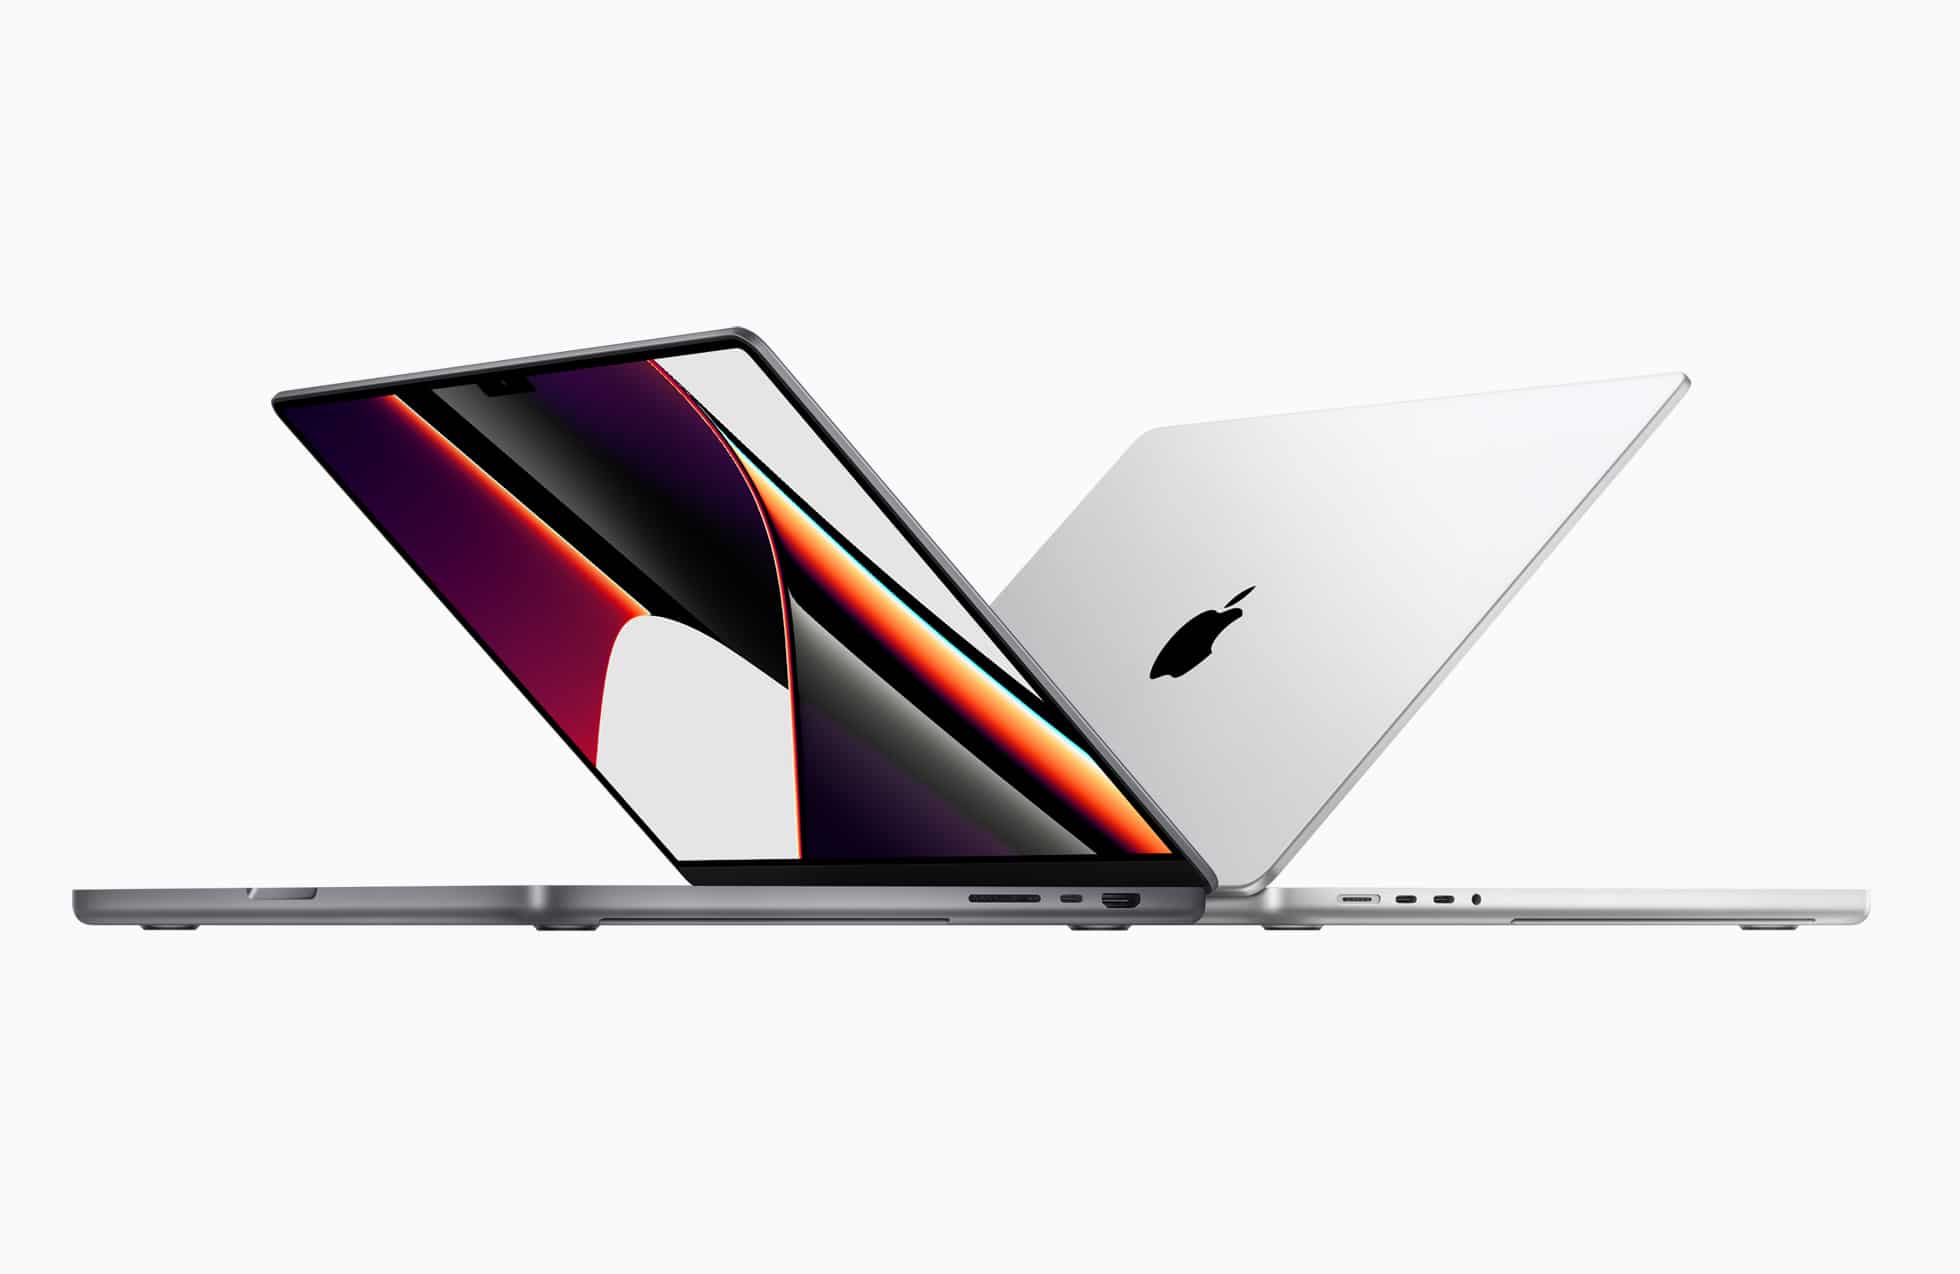 Apple | MacBook Pro not produced sufficiently again until July? | macbook | Apple MacBook Pro 14 16 inch 10182021.0137373d61504171b5c494d2994de0ad